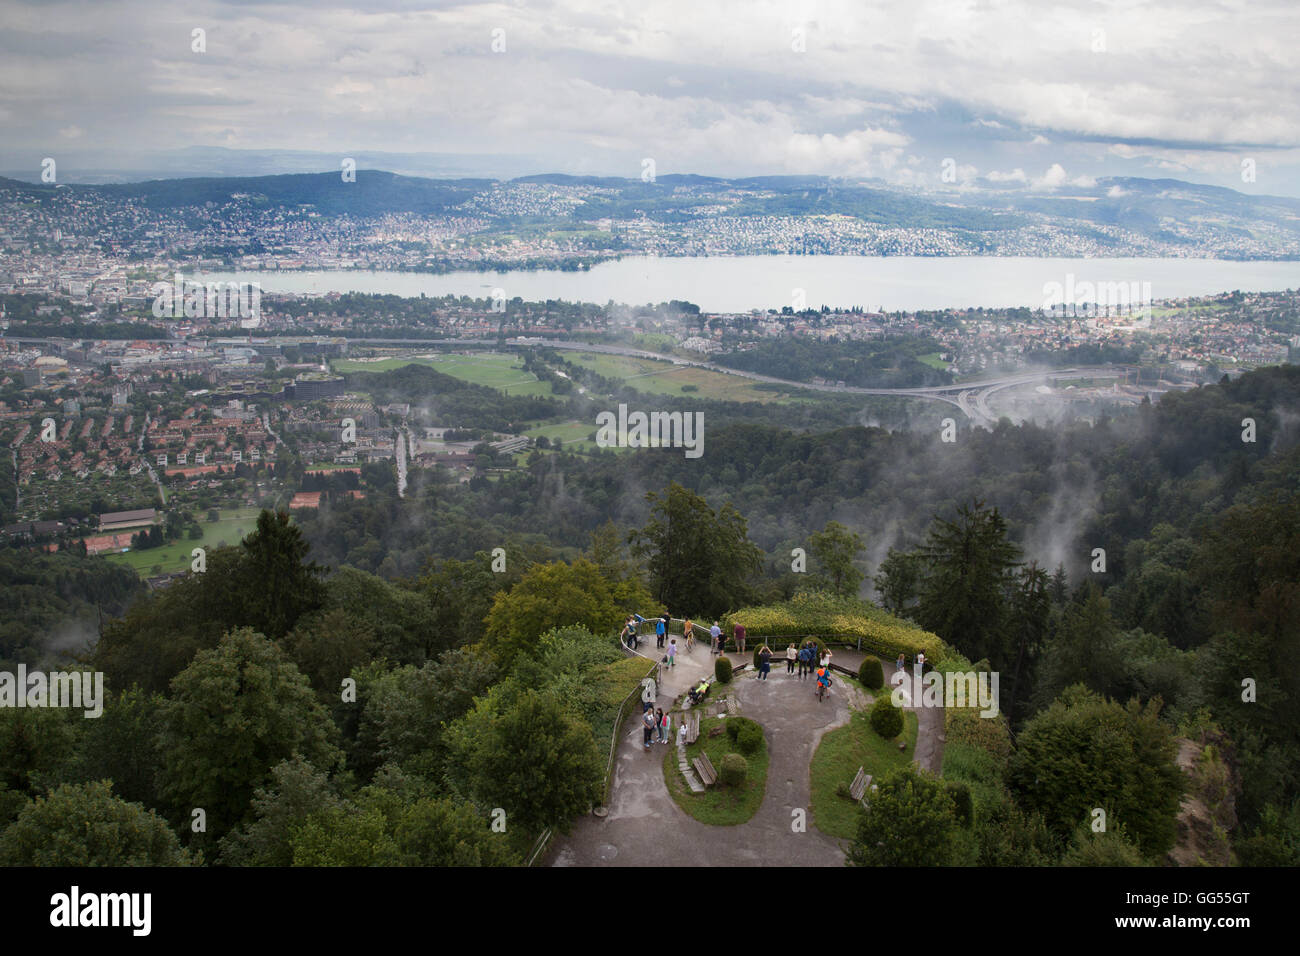 The view over Lake Zurich and Zurich city centre from the top of Üetliberg in Switzerland. Stock Photo